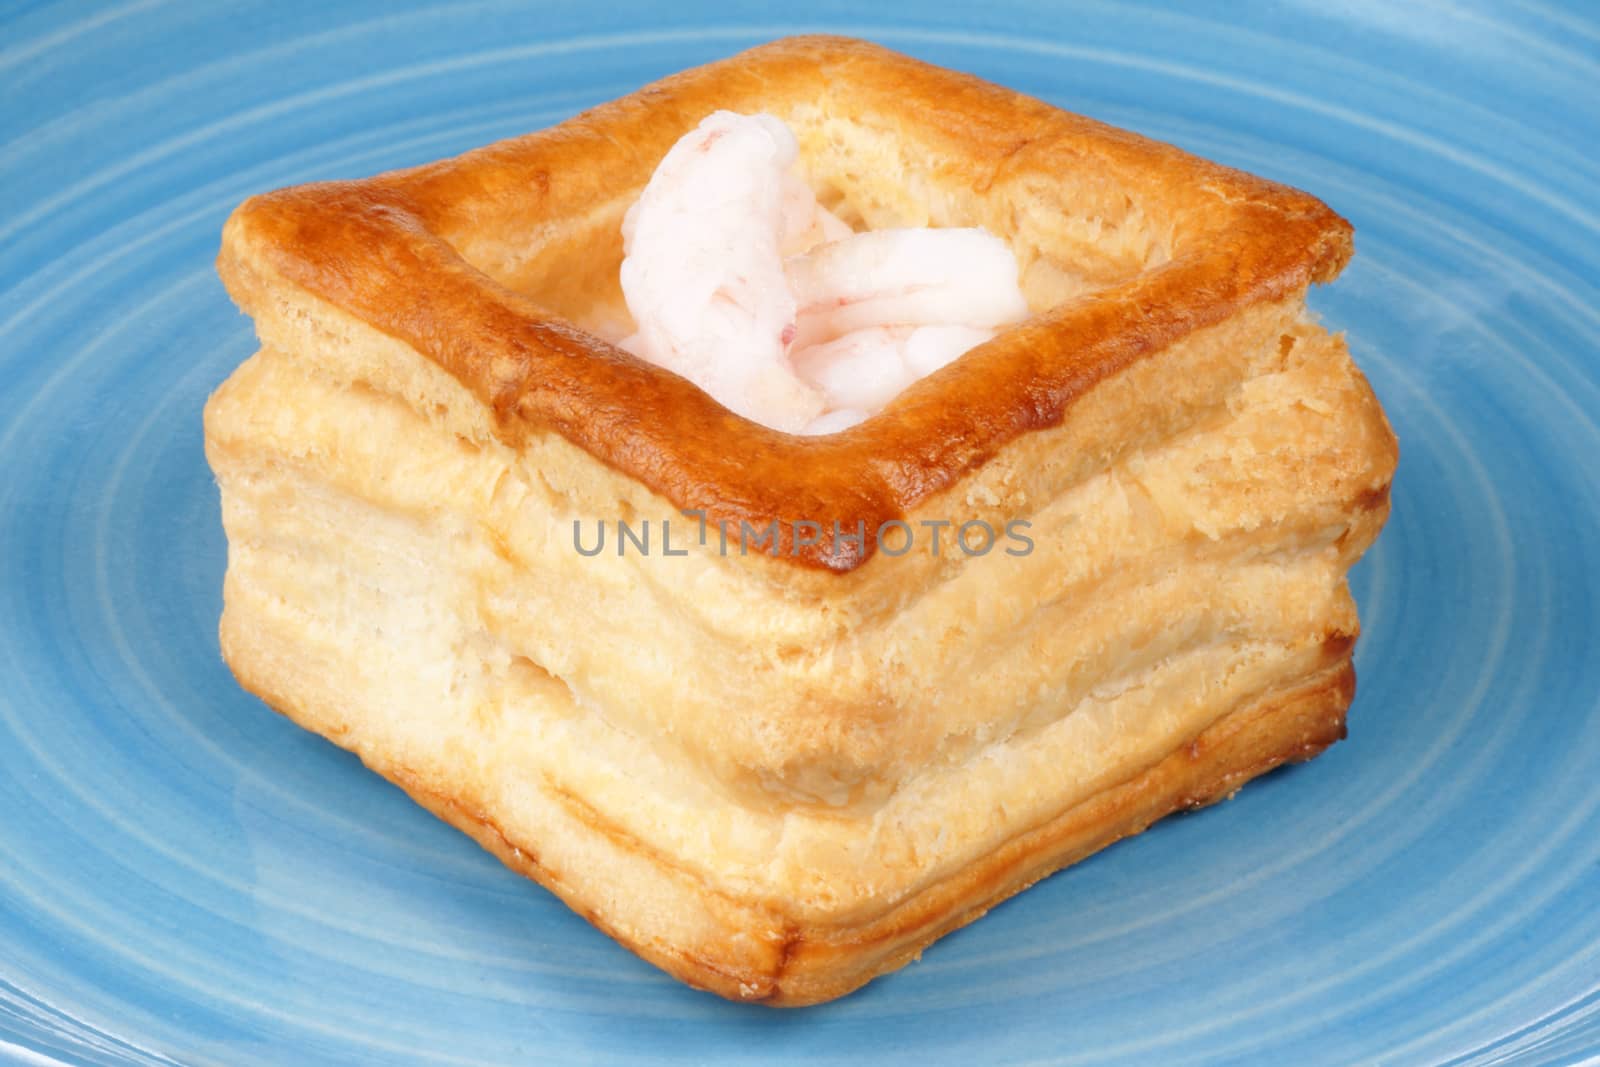 Close-up of a squared vol-au-vent stuffed with small boiled shrimps on a blue plate